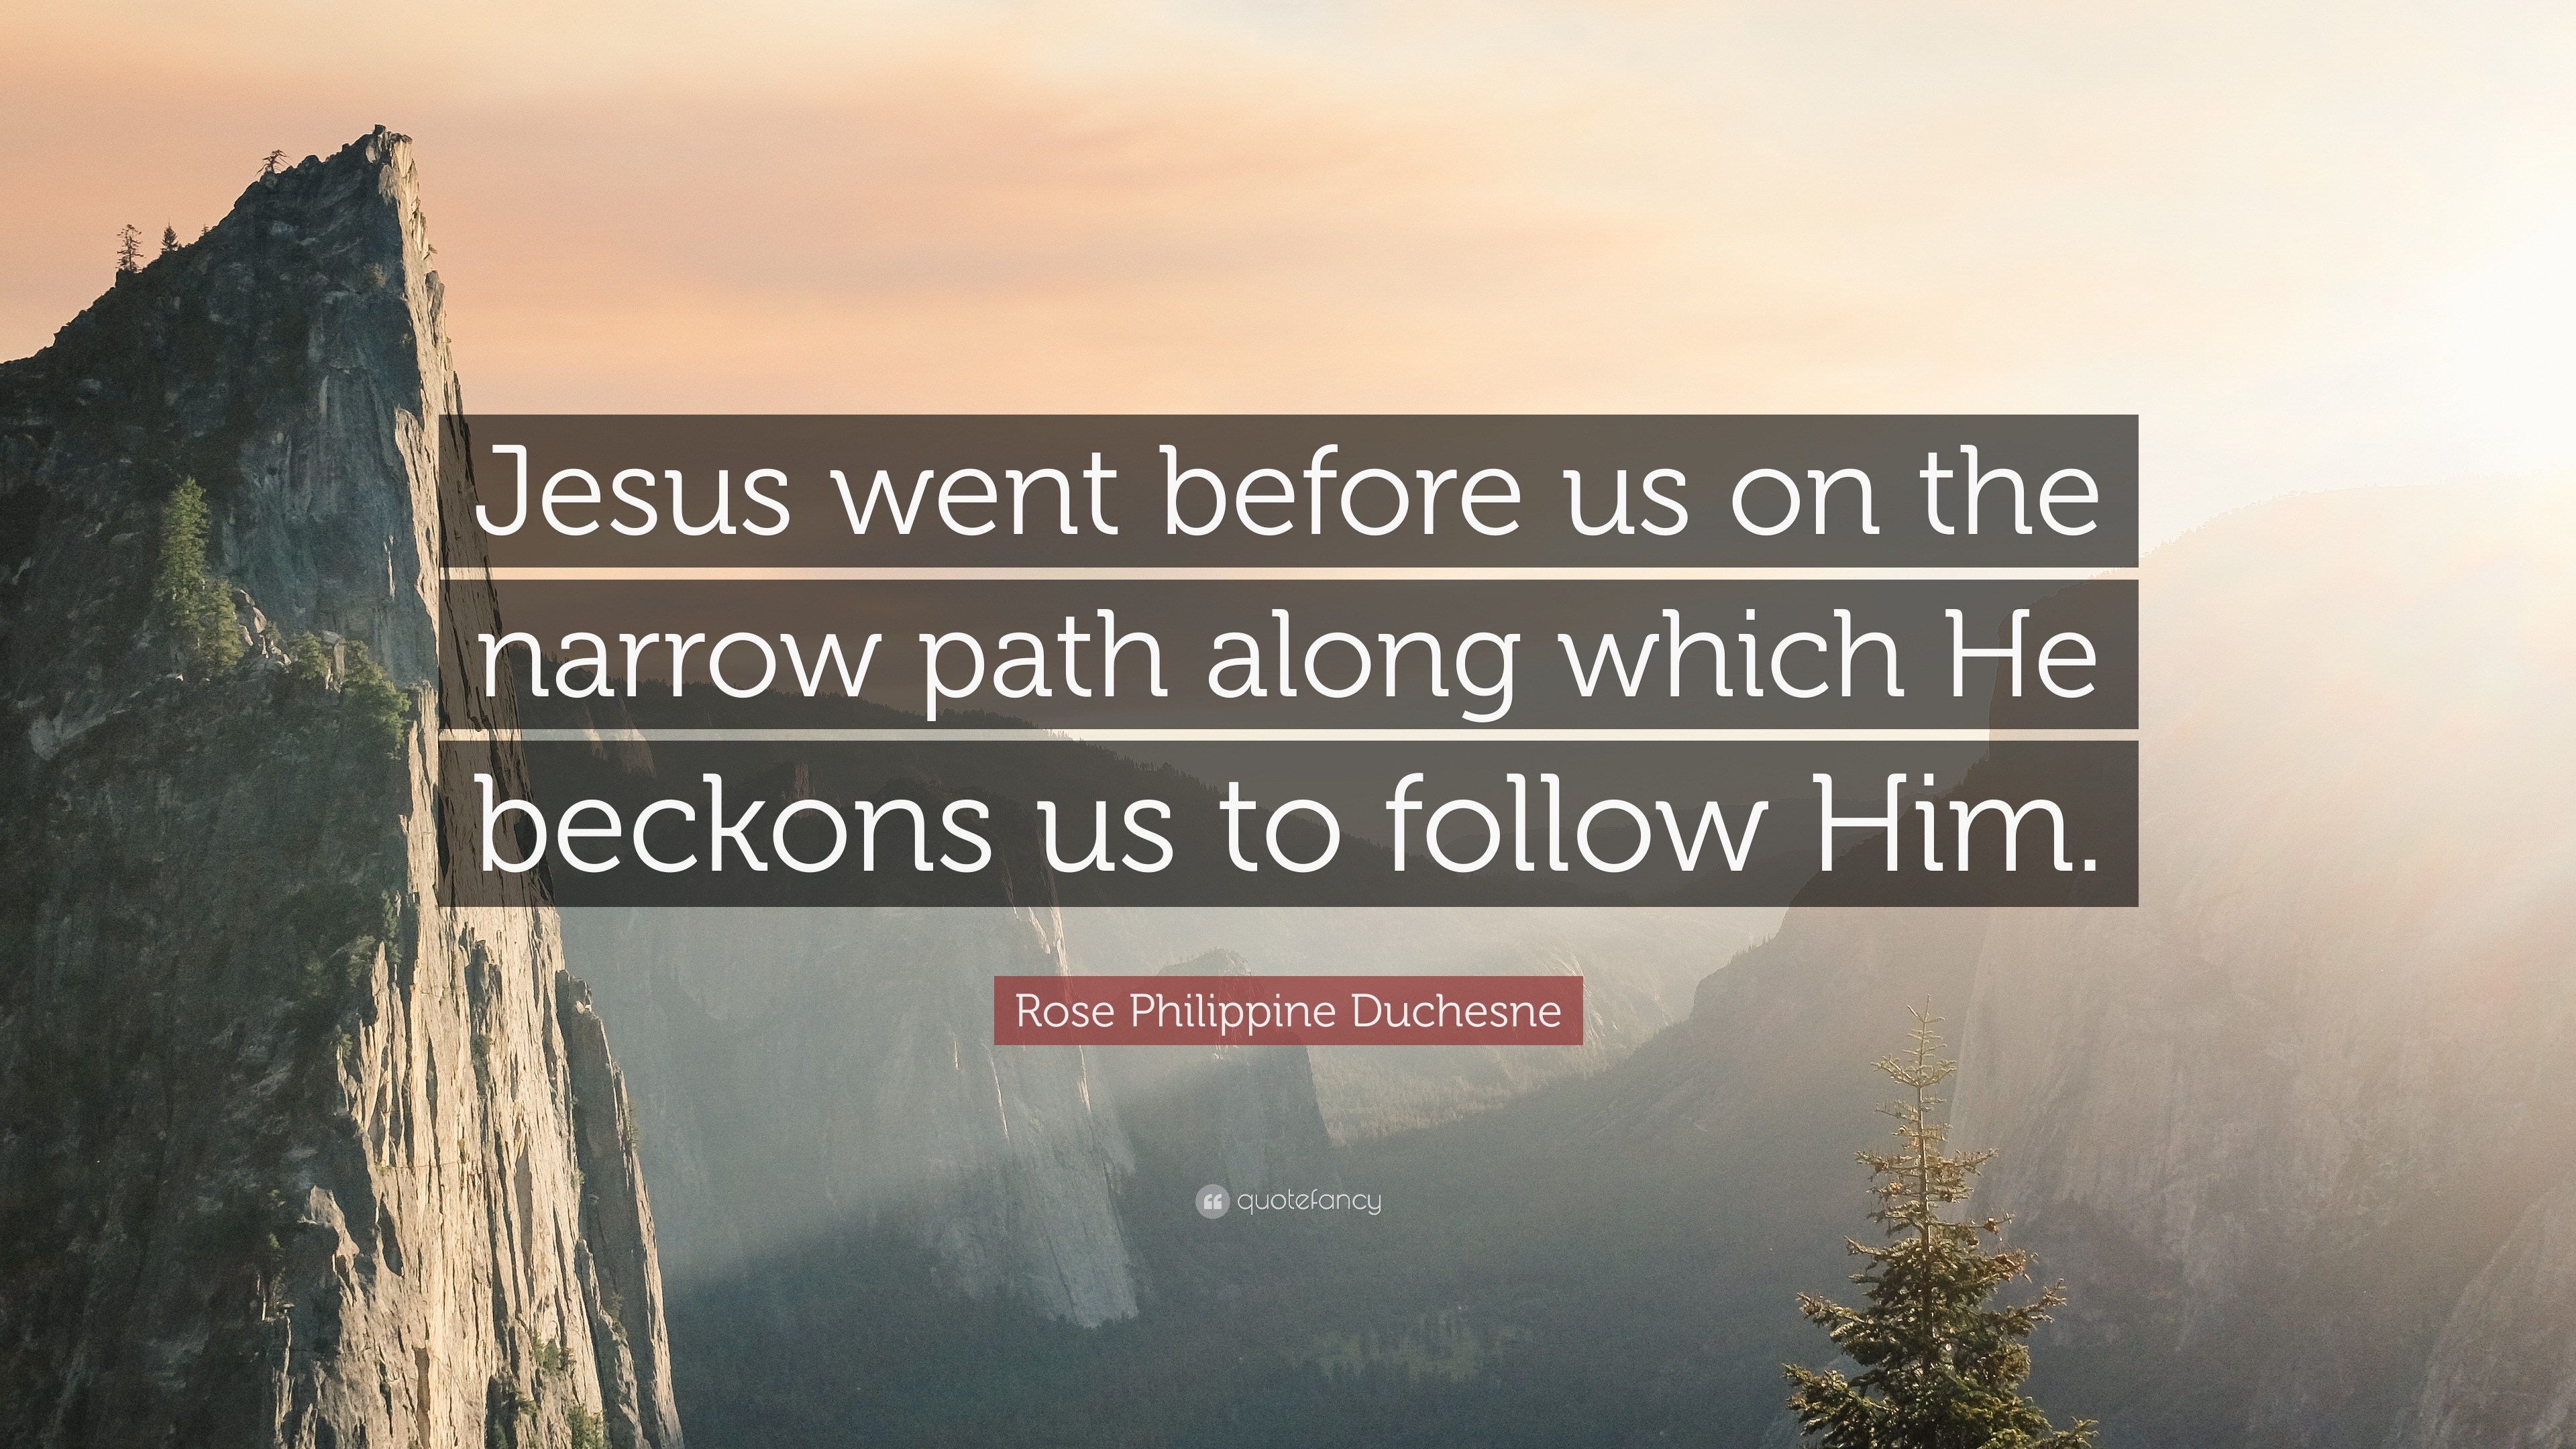 Rose Philippine Duchesne Quote: “Jesus Went Before Us On The Narrow Path Along Which He Beckons